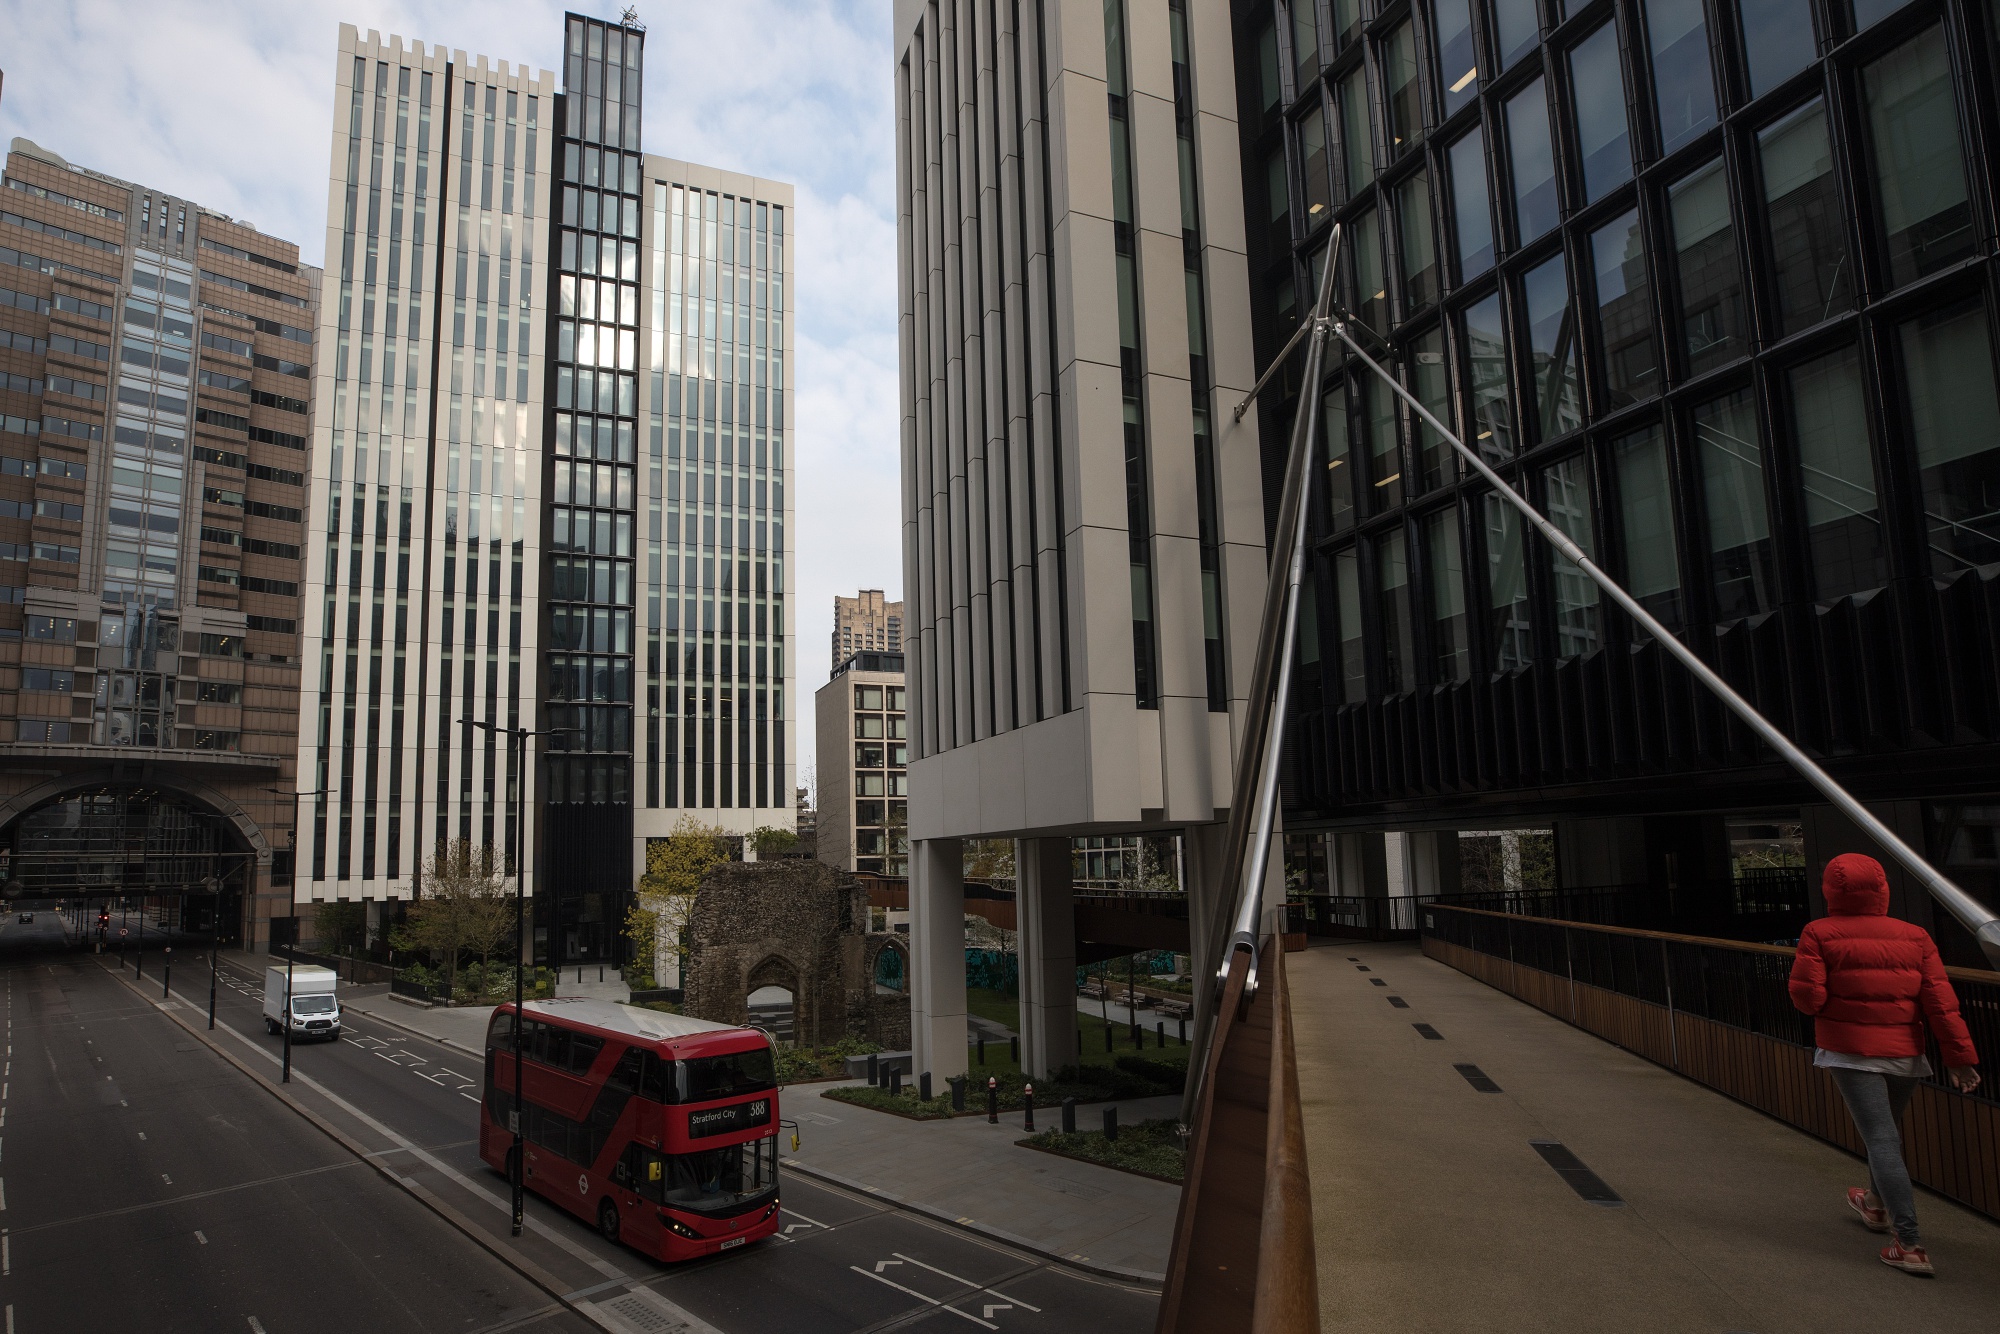 A bus drives down London Wall past commercial offices in the City of London, U.K., on Saturday, April 13, 2019. Job vacancies in London’s finance industry have halved in two years as uncertainty over Brexit knocks business confidence, a survey by recruiter Morgan McKinley has found.